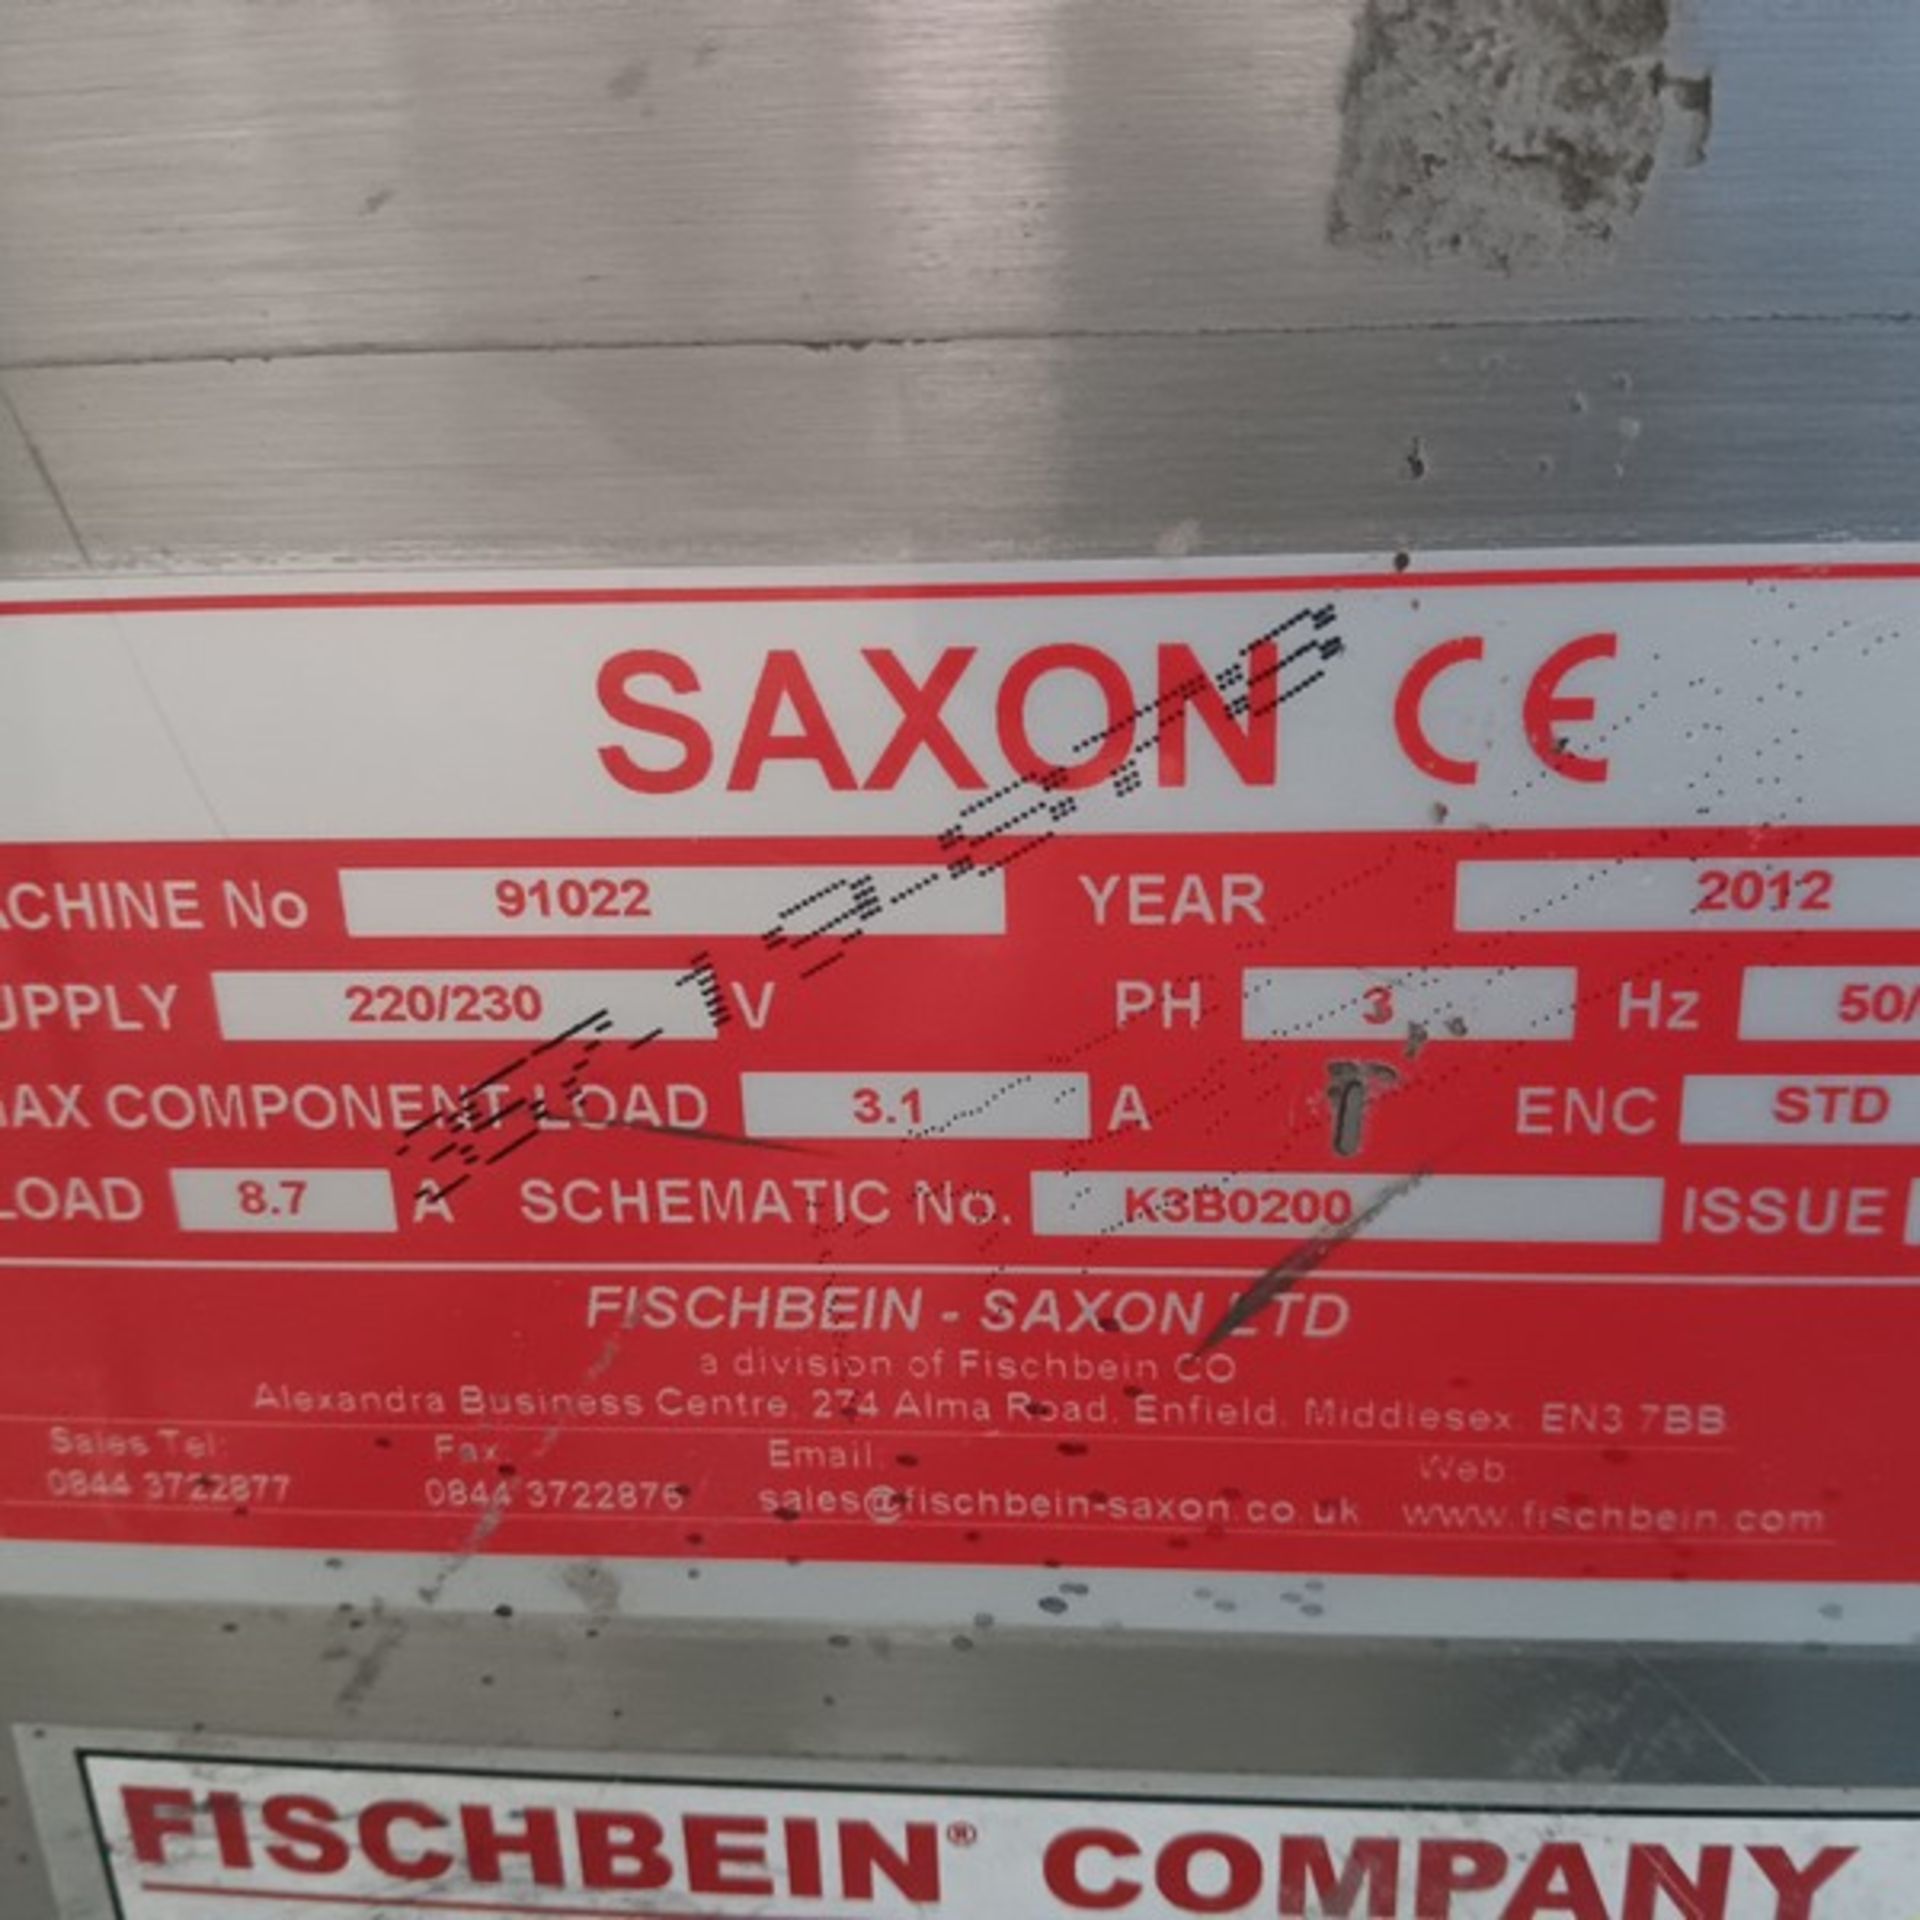 Fischbein-Saxon Band Sealer, Model SB3000, S/N 91022, Volt 220/240, 3 Phase, Yr. 2012 (Located - Image 4 of 4